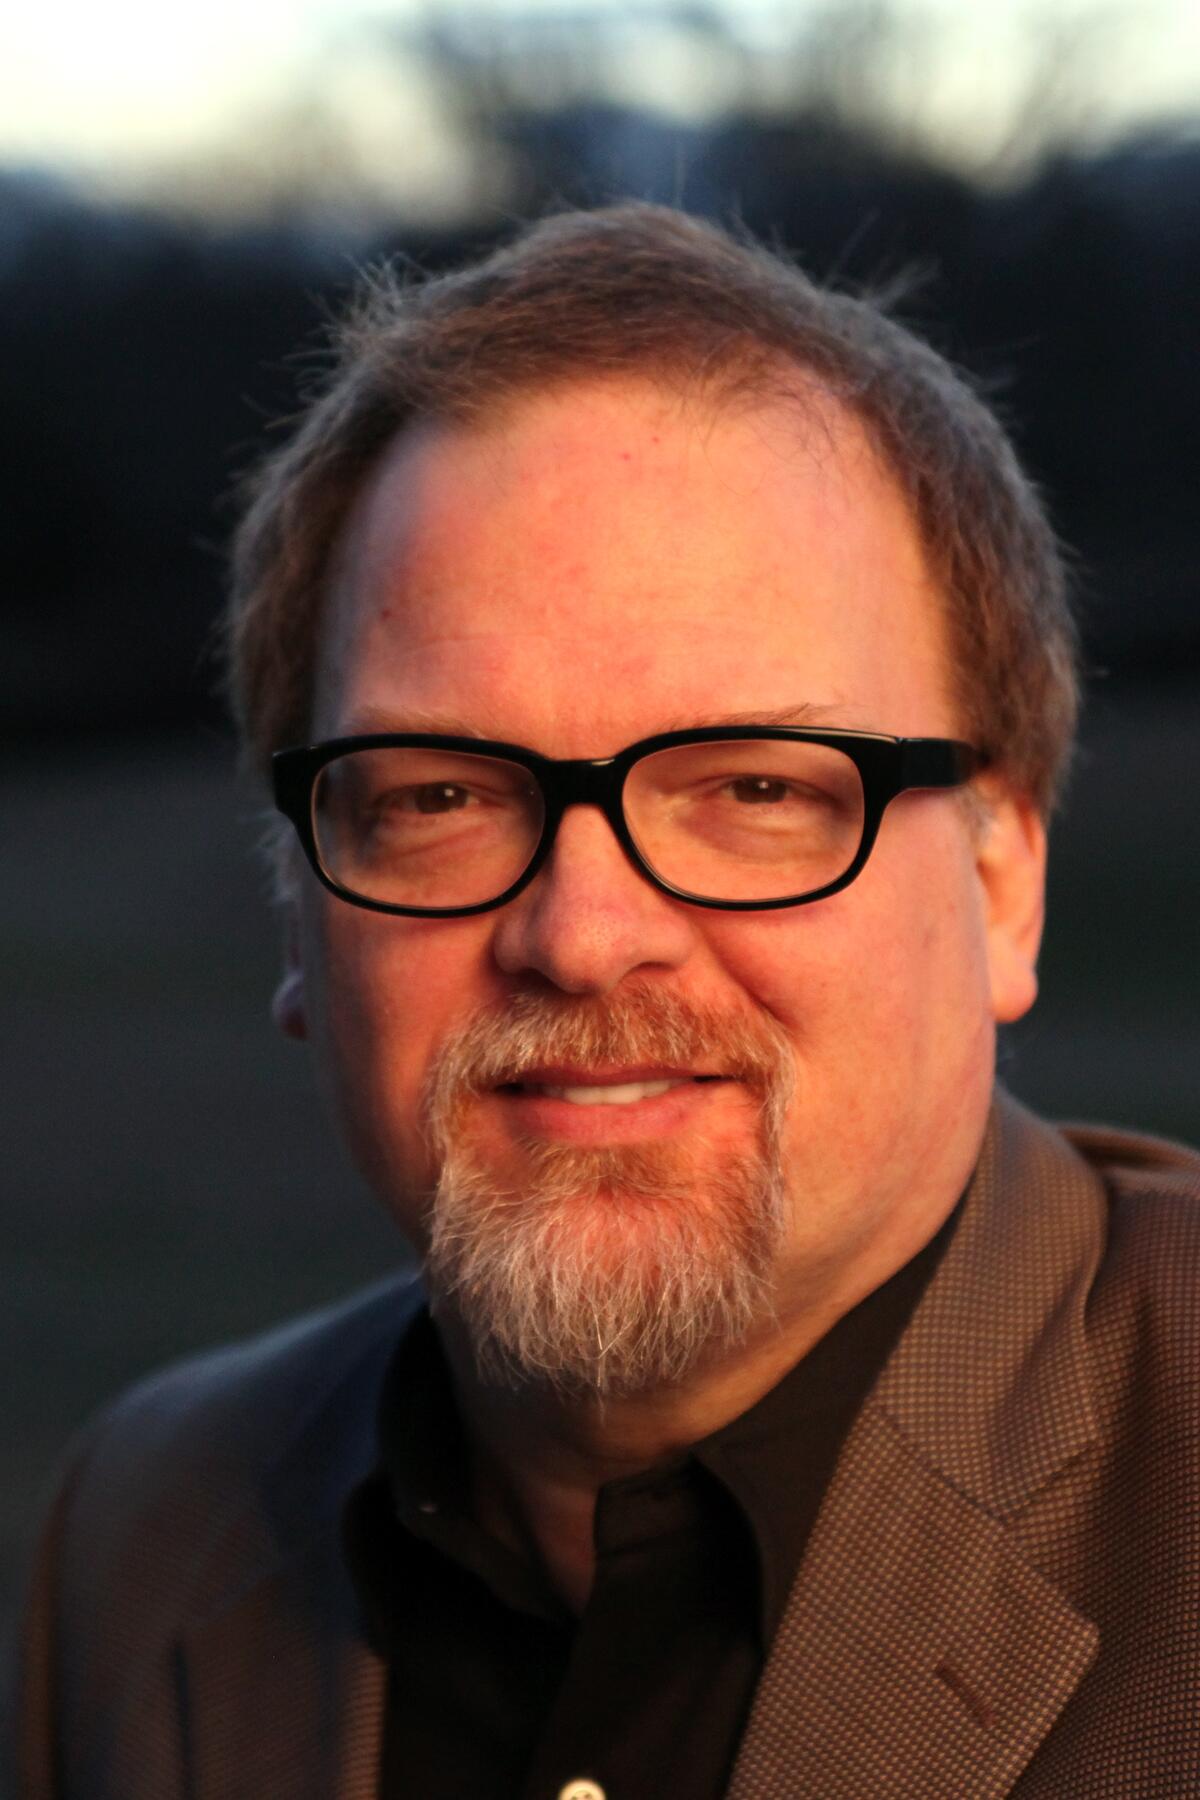 Greg Iles, in black-rimmed glasses and a goatee, smiles to the camera.